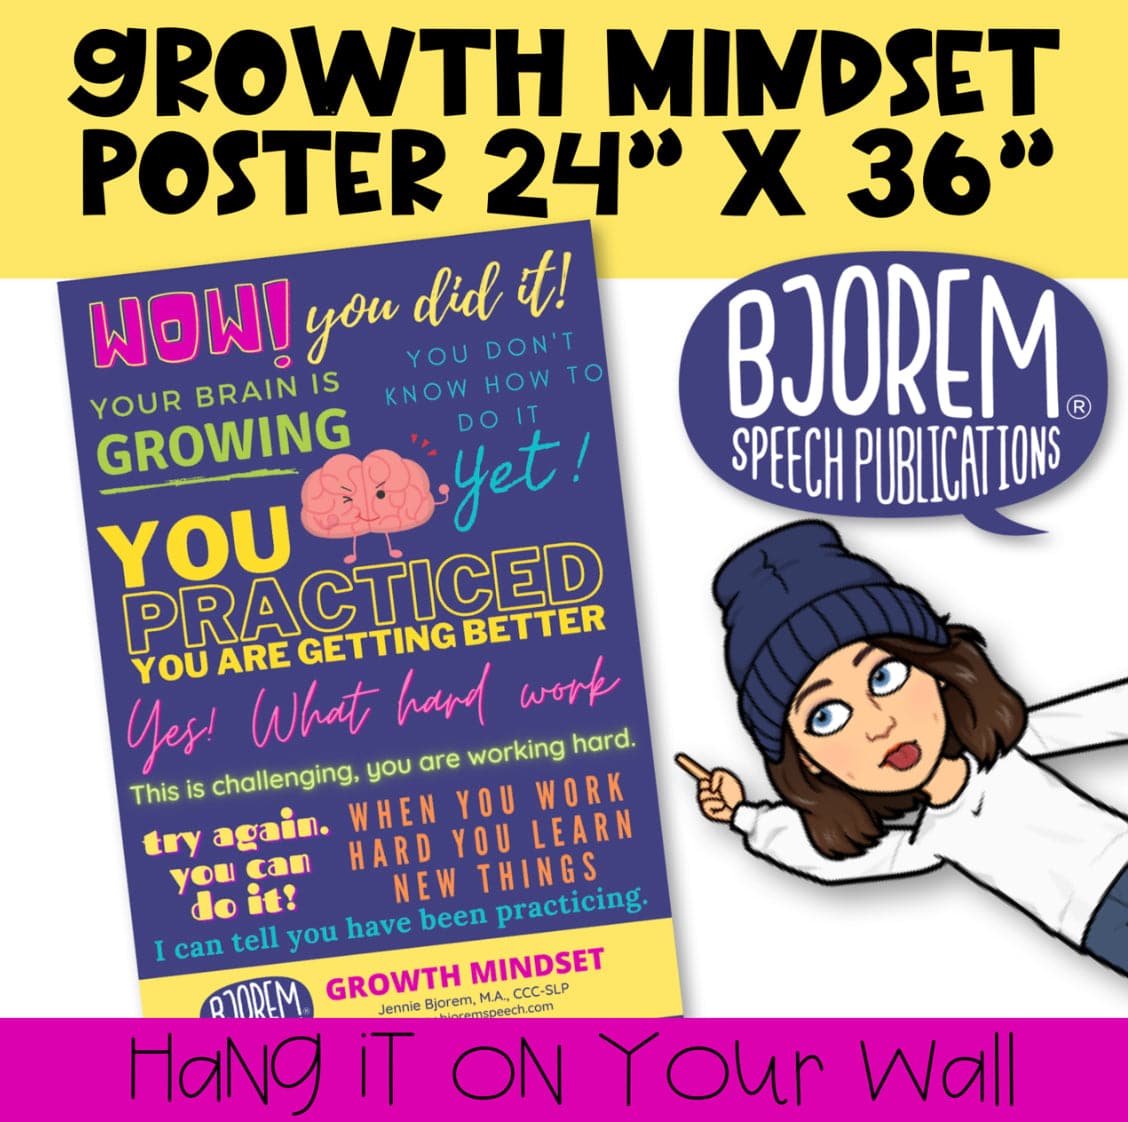 [title]Growth Mindset Poster - Download